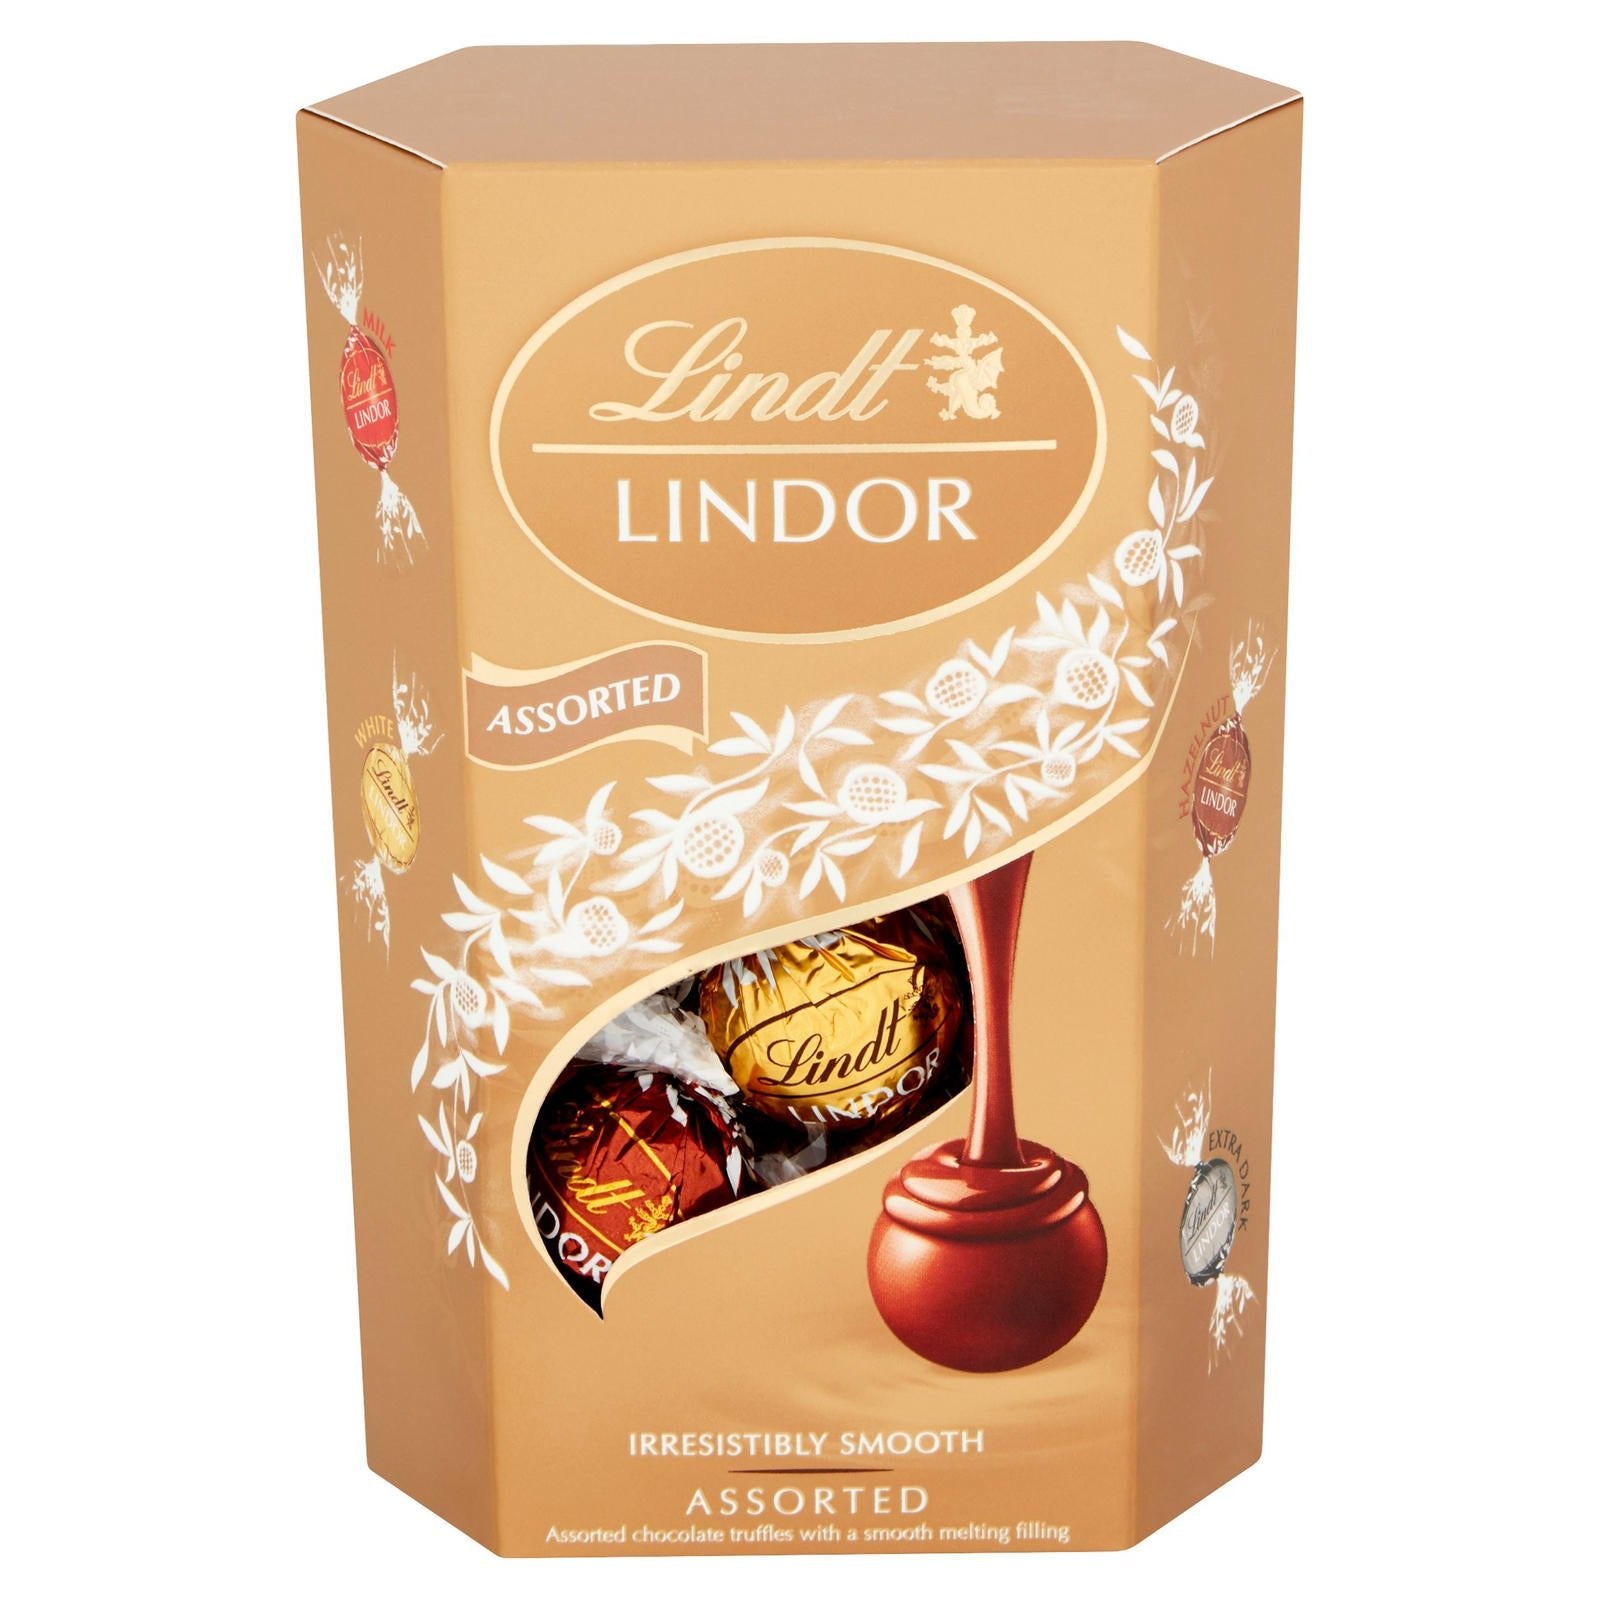 Lindt Lindor Assorted Chocolate Truffles Box 200g - Jessica's Sweets